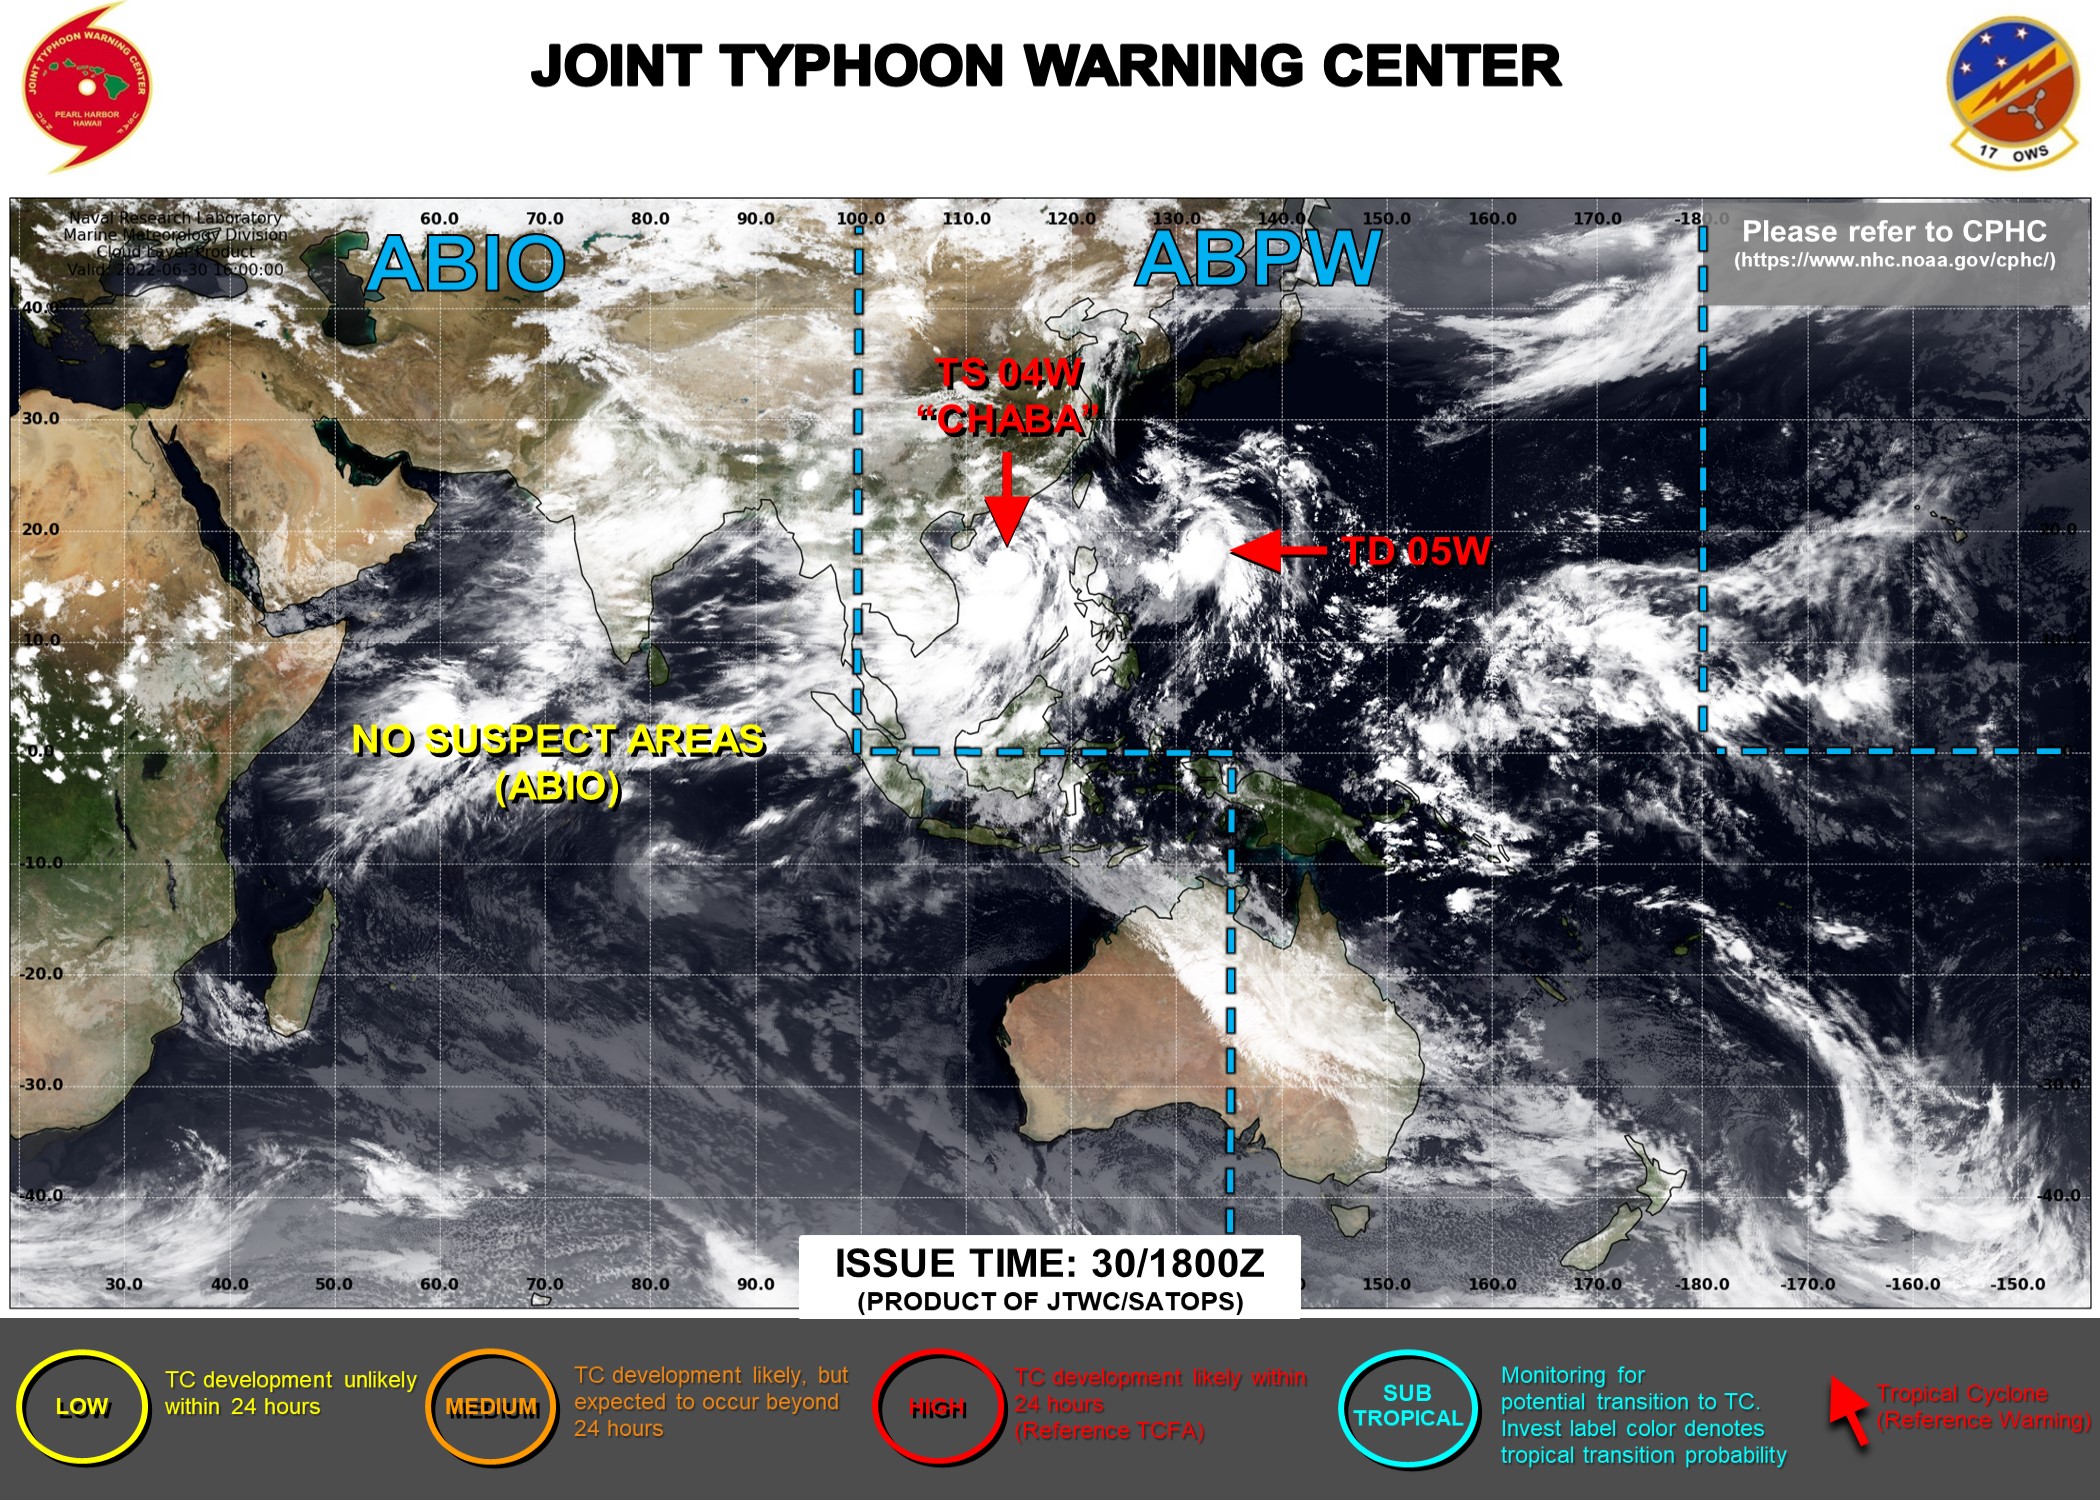 JTWC IS ISSUING 6HOULRY WARNINGS ON TS 04W AND TS 05W. 3HOURLY WARNINGS ARE ISSUED ON BOTH SYSTEMS.